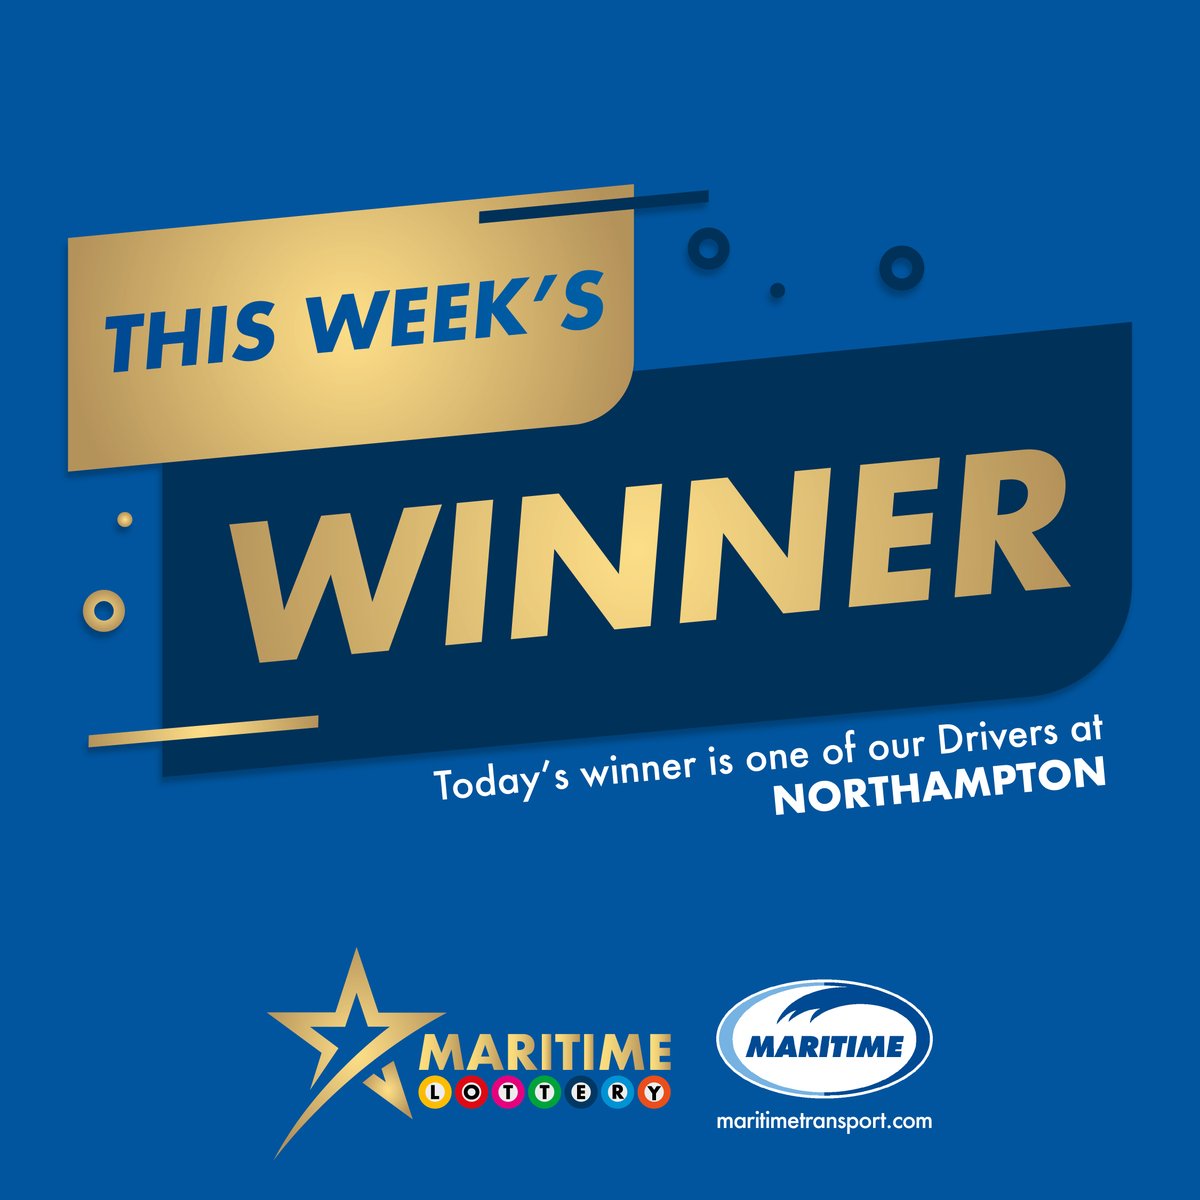 Congratulations to one of our Drivers, based at Northampton, who has just been announced as this week’s winner of our Maritime Lottery, taking home £1,000! Employees head to iWave to find out more. #mtllottery #maritimetransport